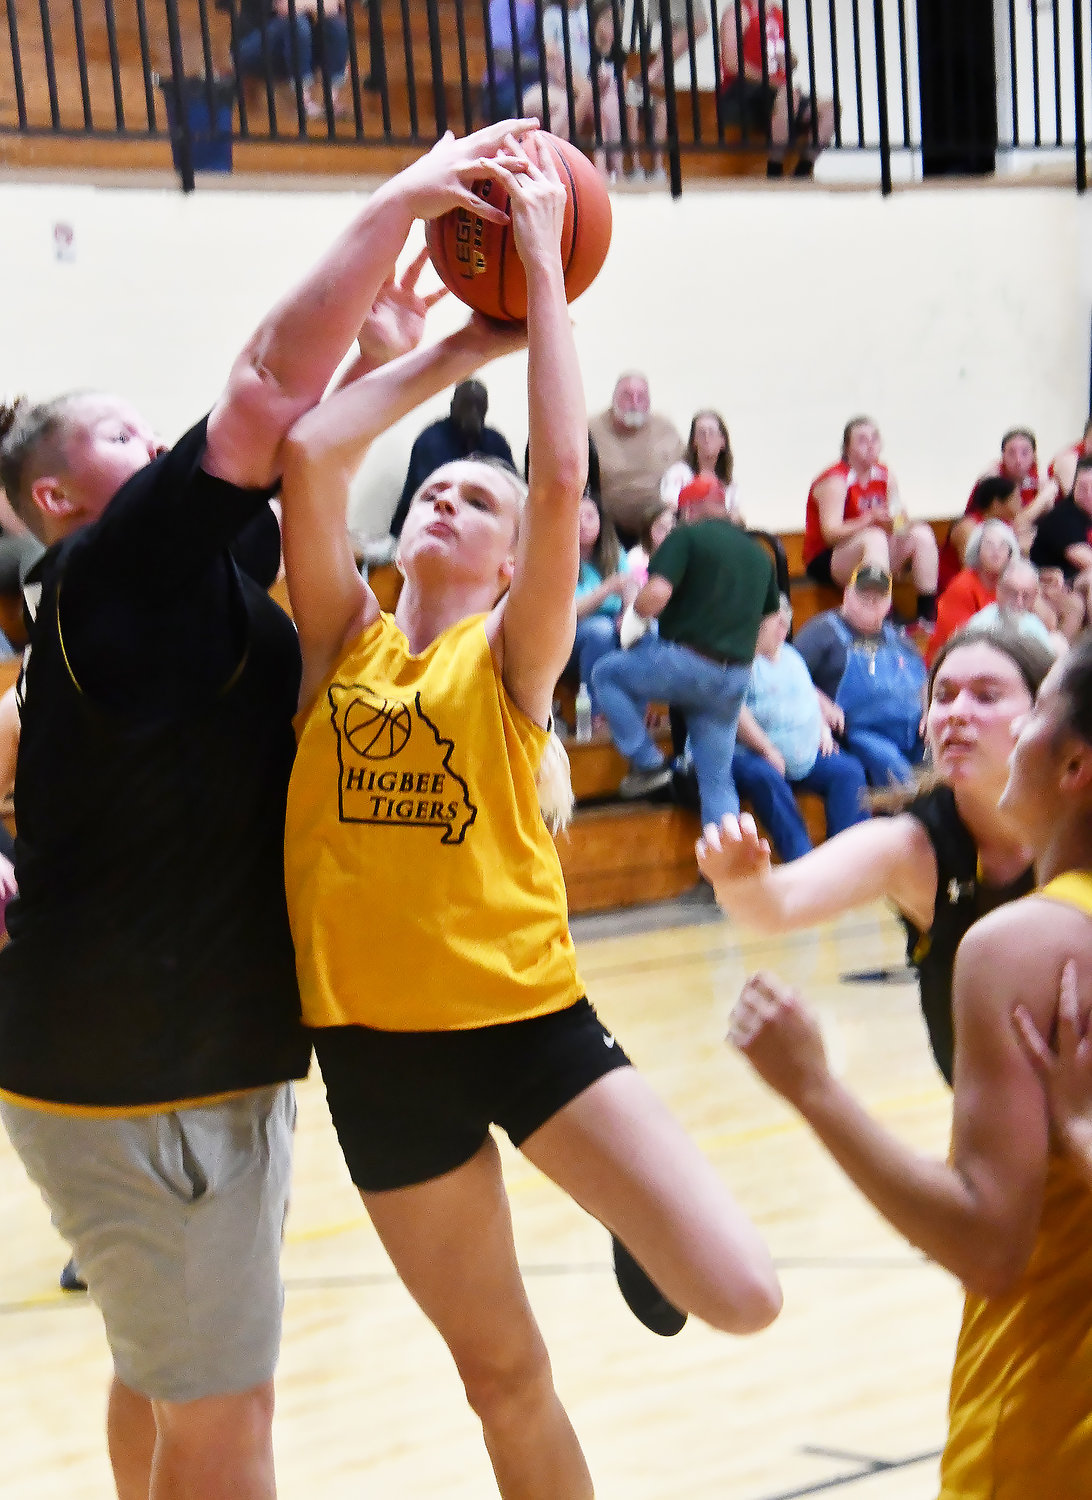 Isabelle Welch of Higbee has her shot deflected by a Wellsville-Middletown player during a scrimmage this week.